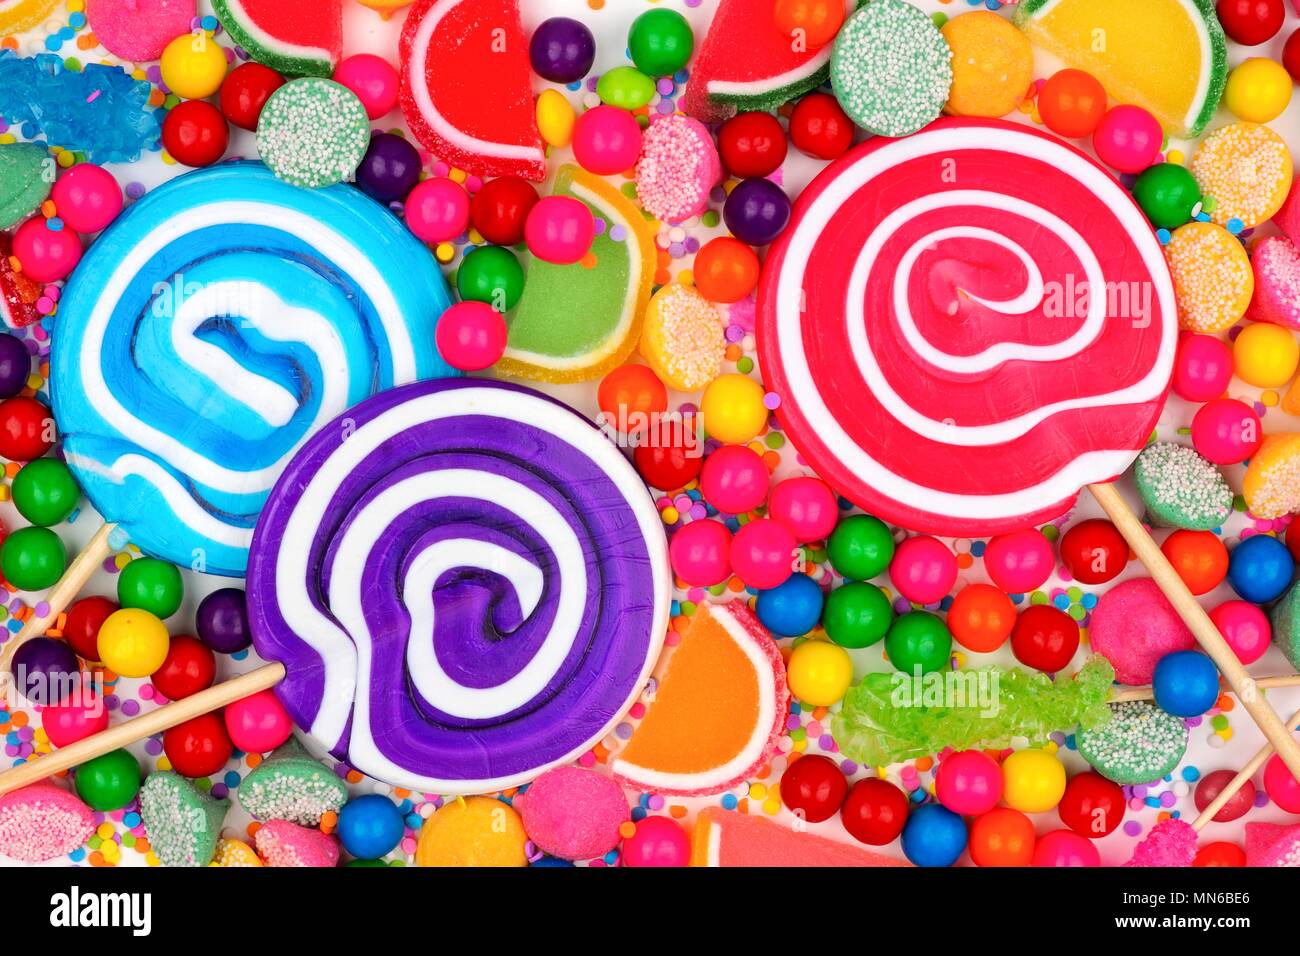 Background of colorful assorted candies including lollipops, gum balls, and jelly candies Stock Photo